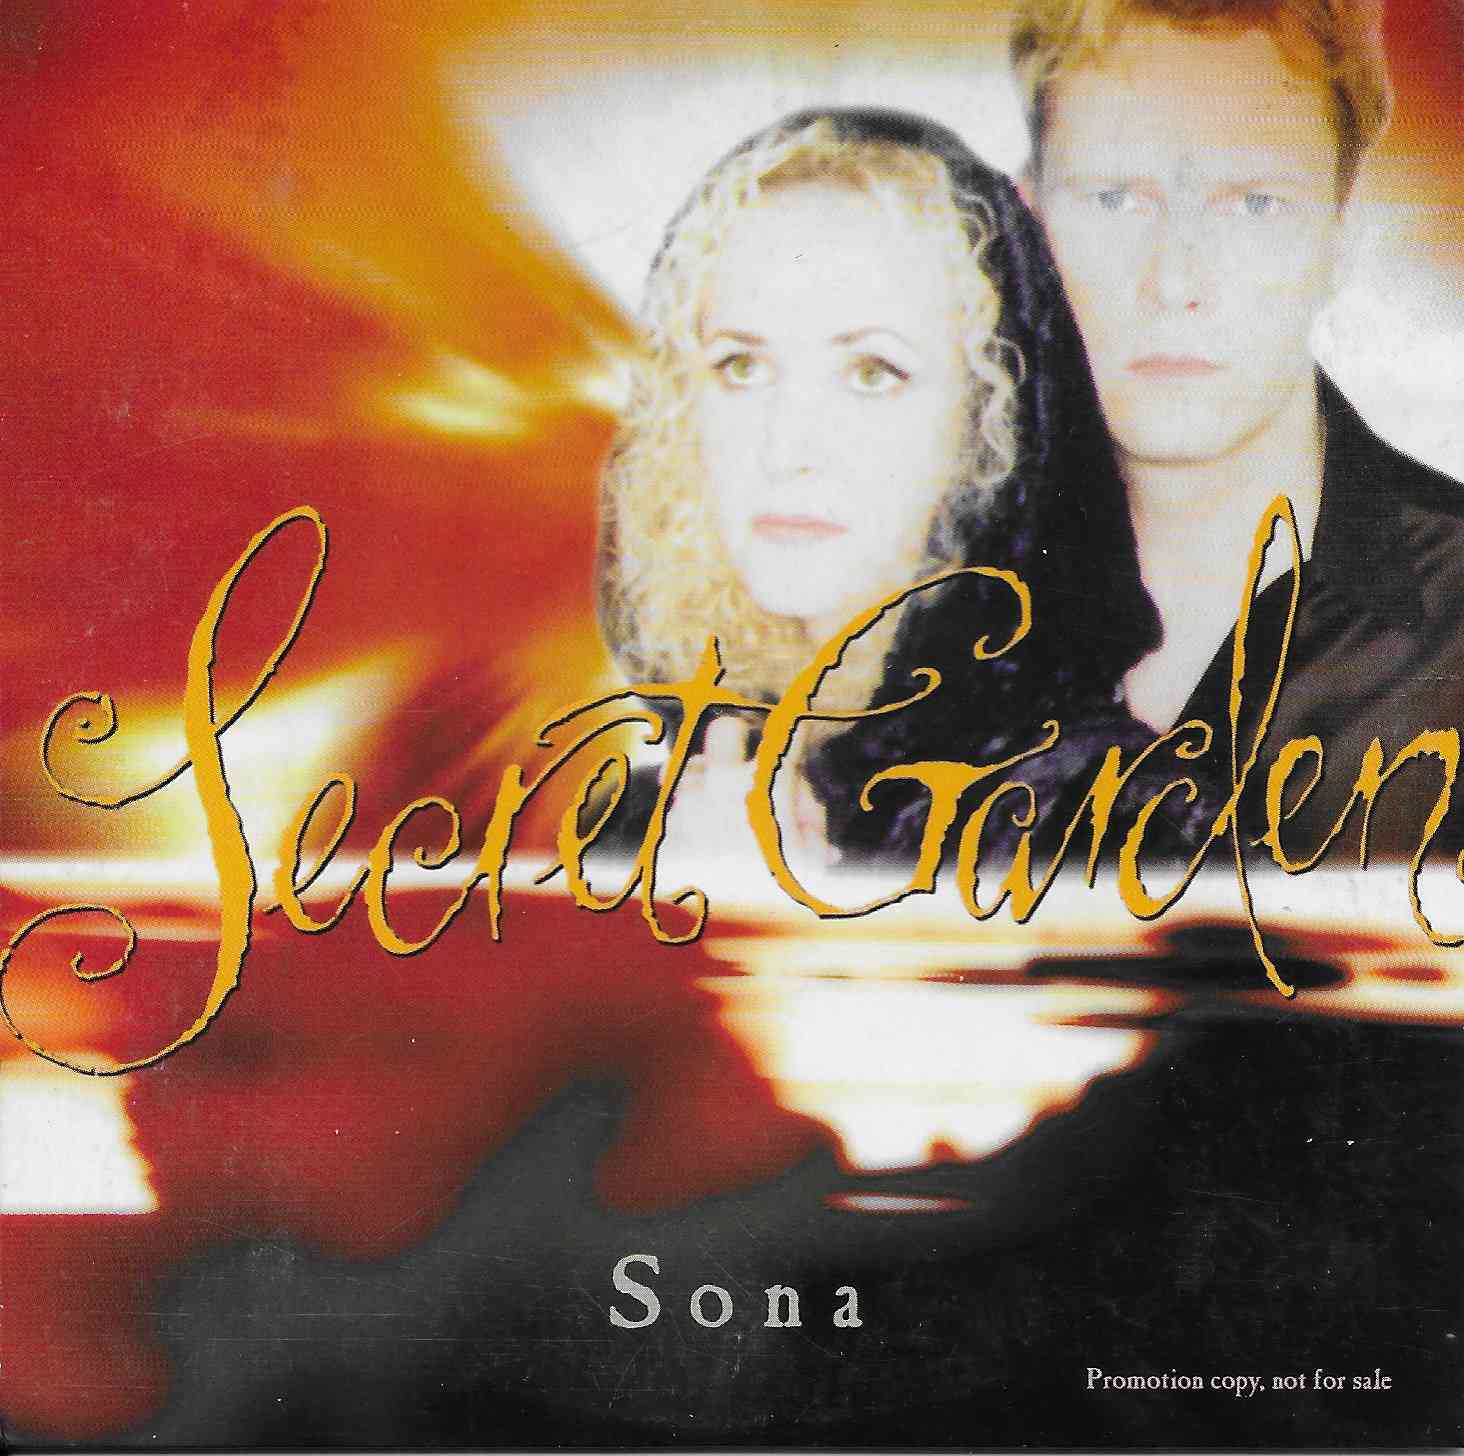 Picture of SG Promo 99-01 Sona - Promotional disc by artist Secret Garden